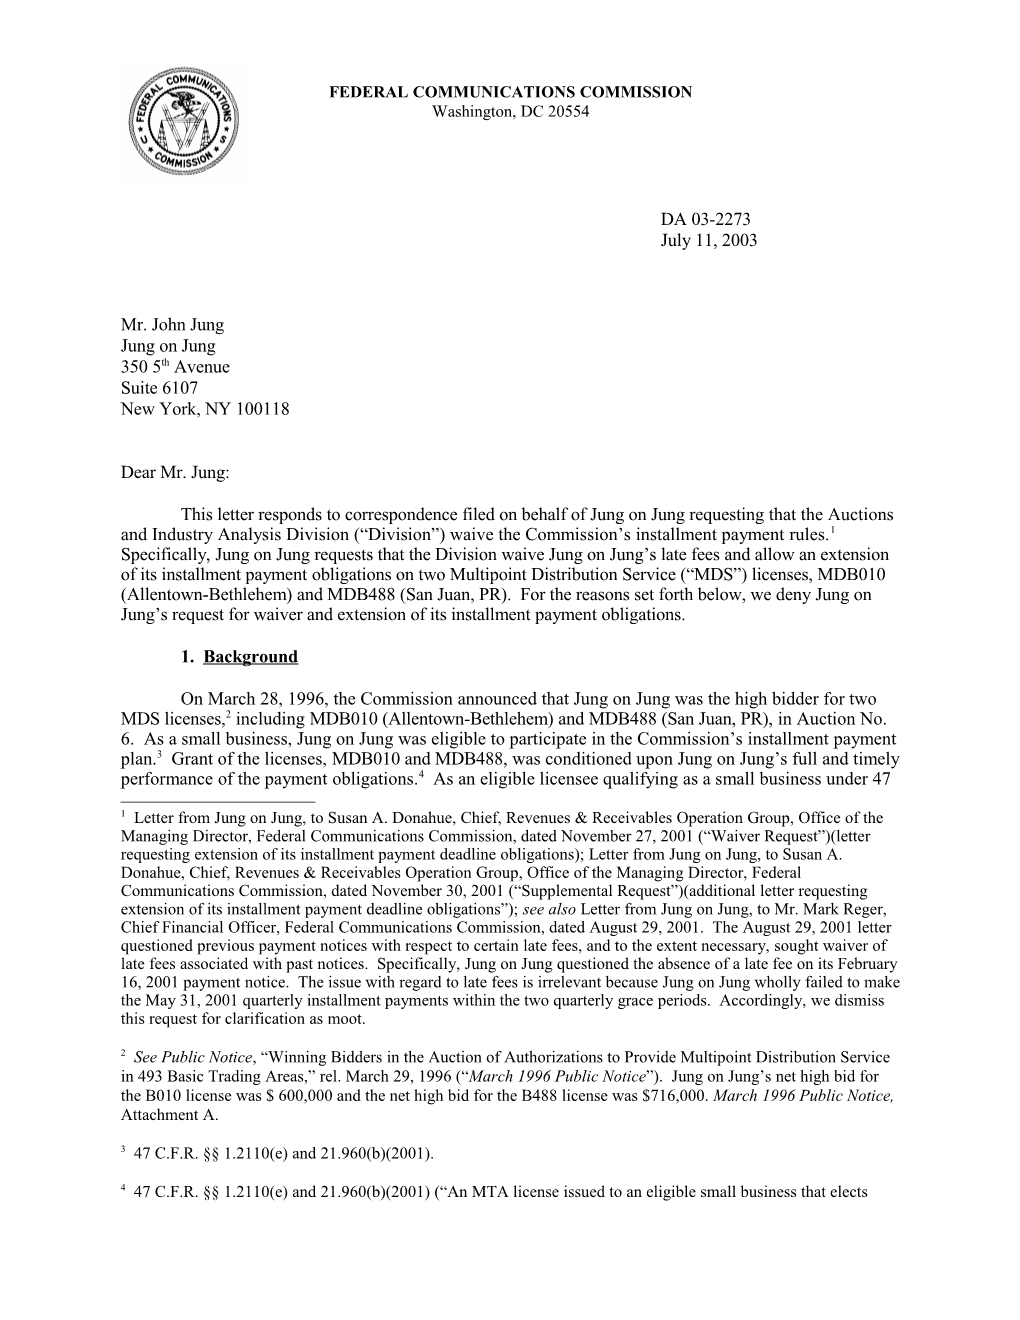 This Letter Responds to Correspondence Filed on Behalf of Jung on Jung Requesting That